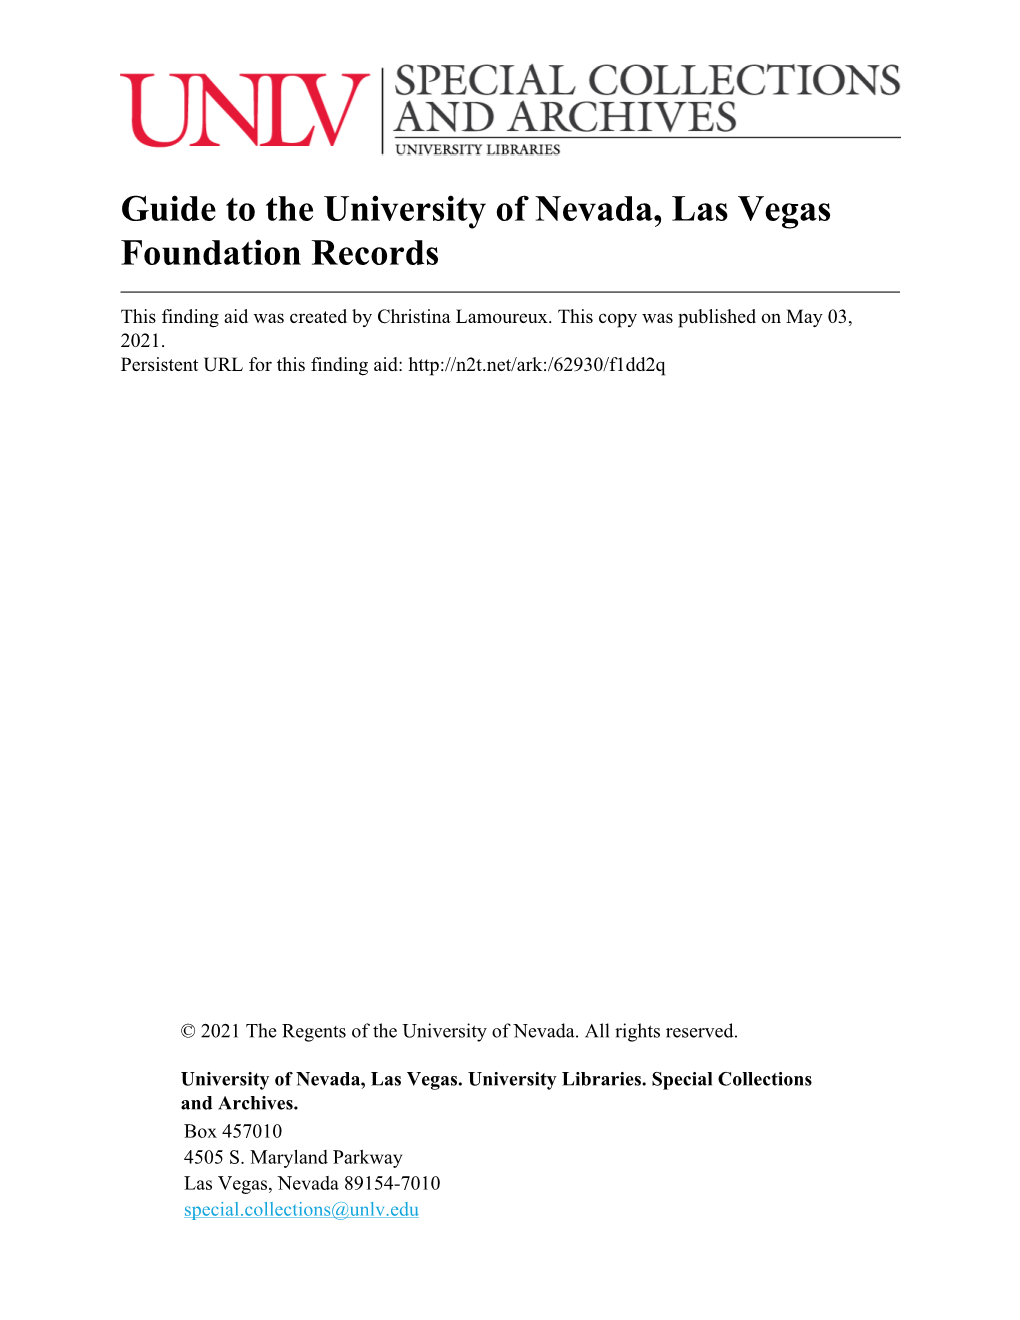 Guide to the University of Nevada, Las Vegas Foundation Records